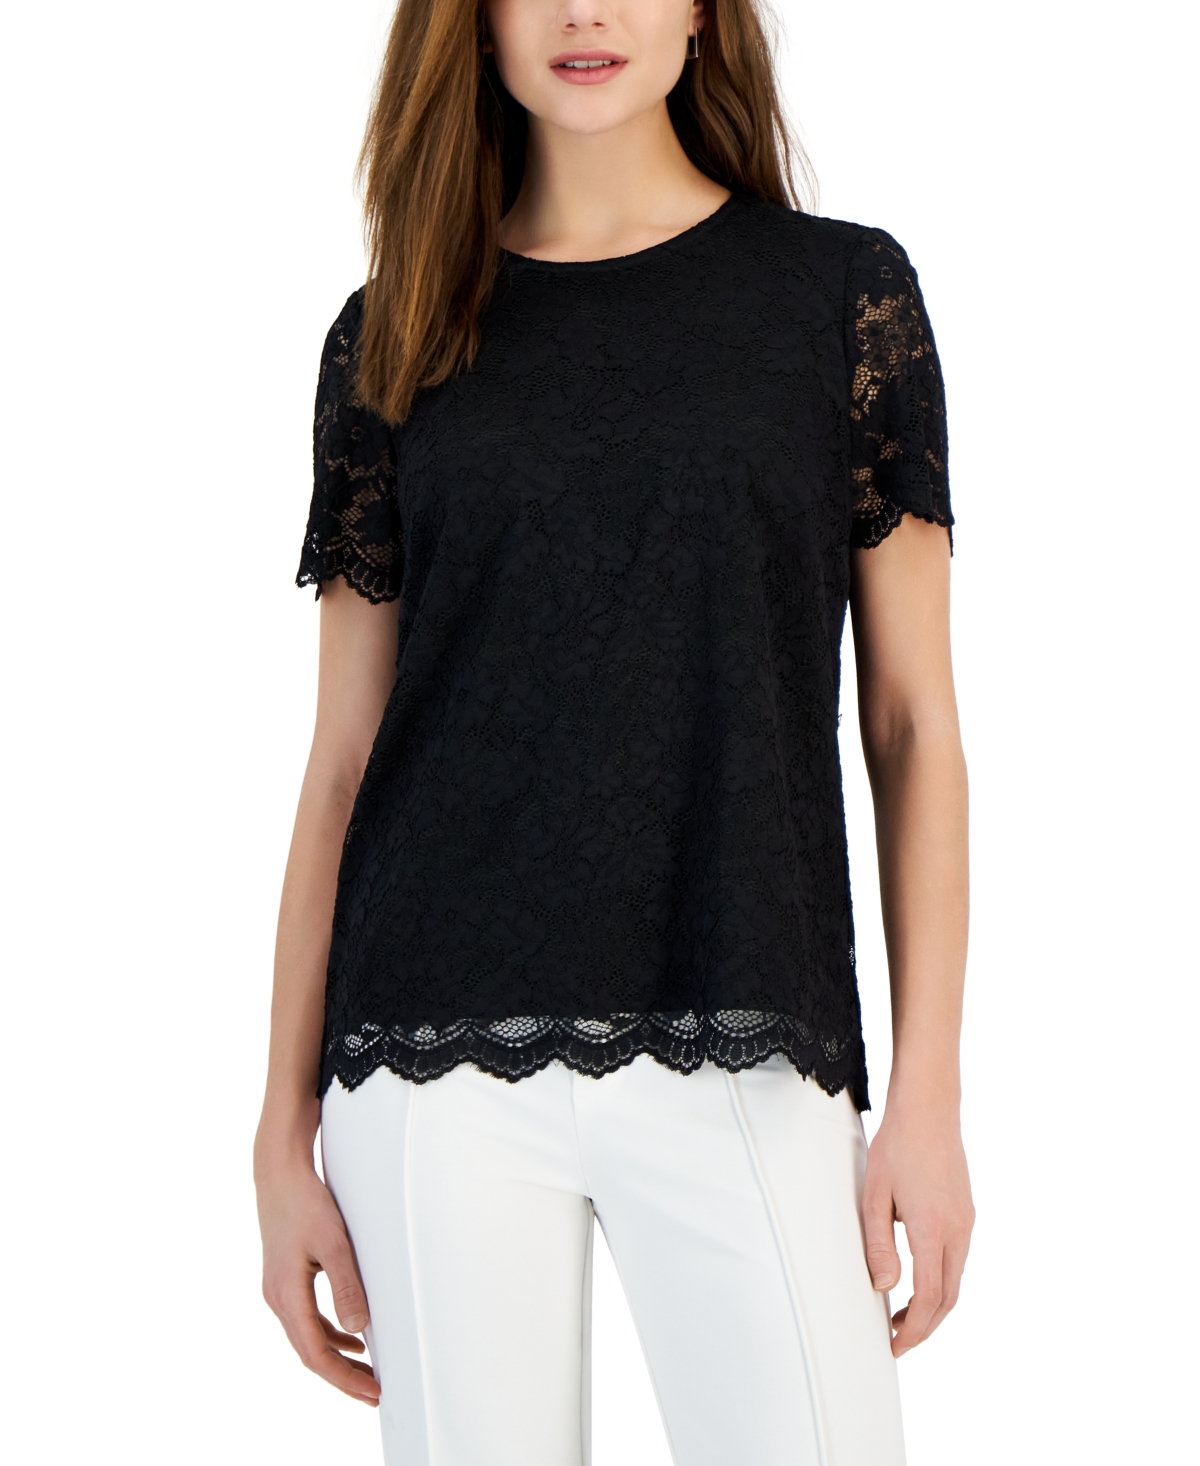 Women's Lace Short-Sleeve Top - Ivory